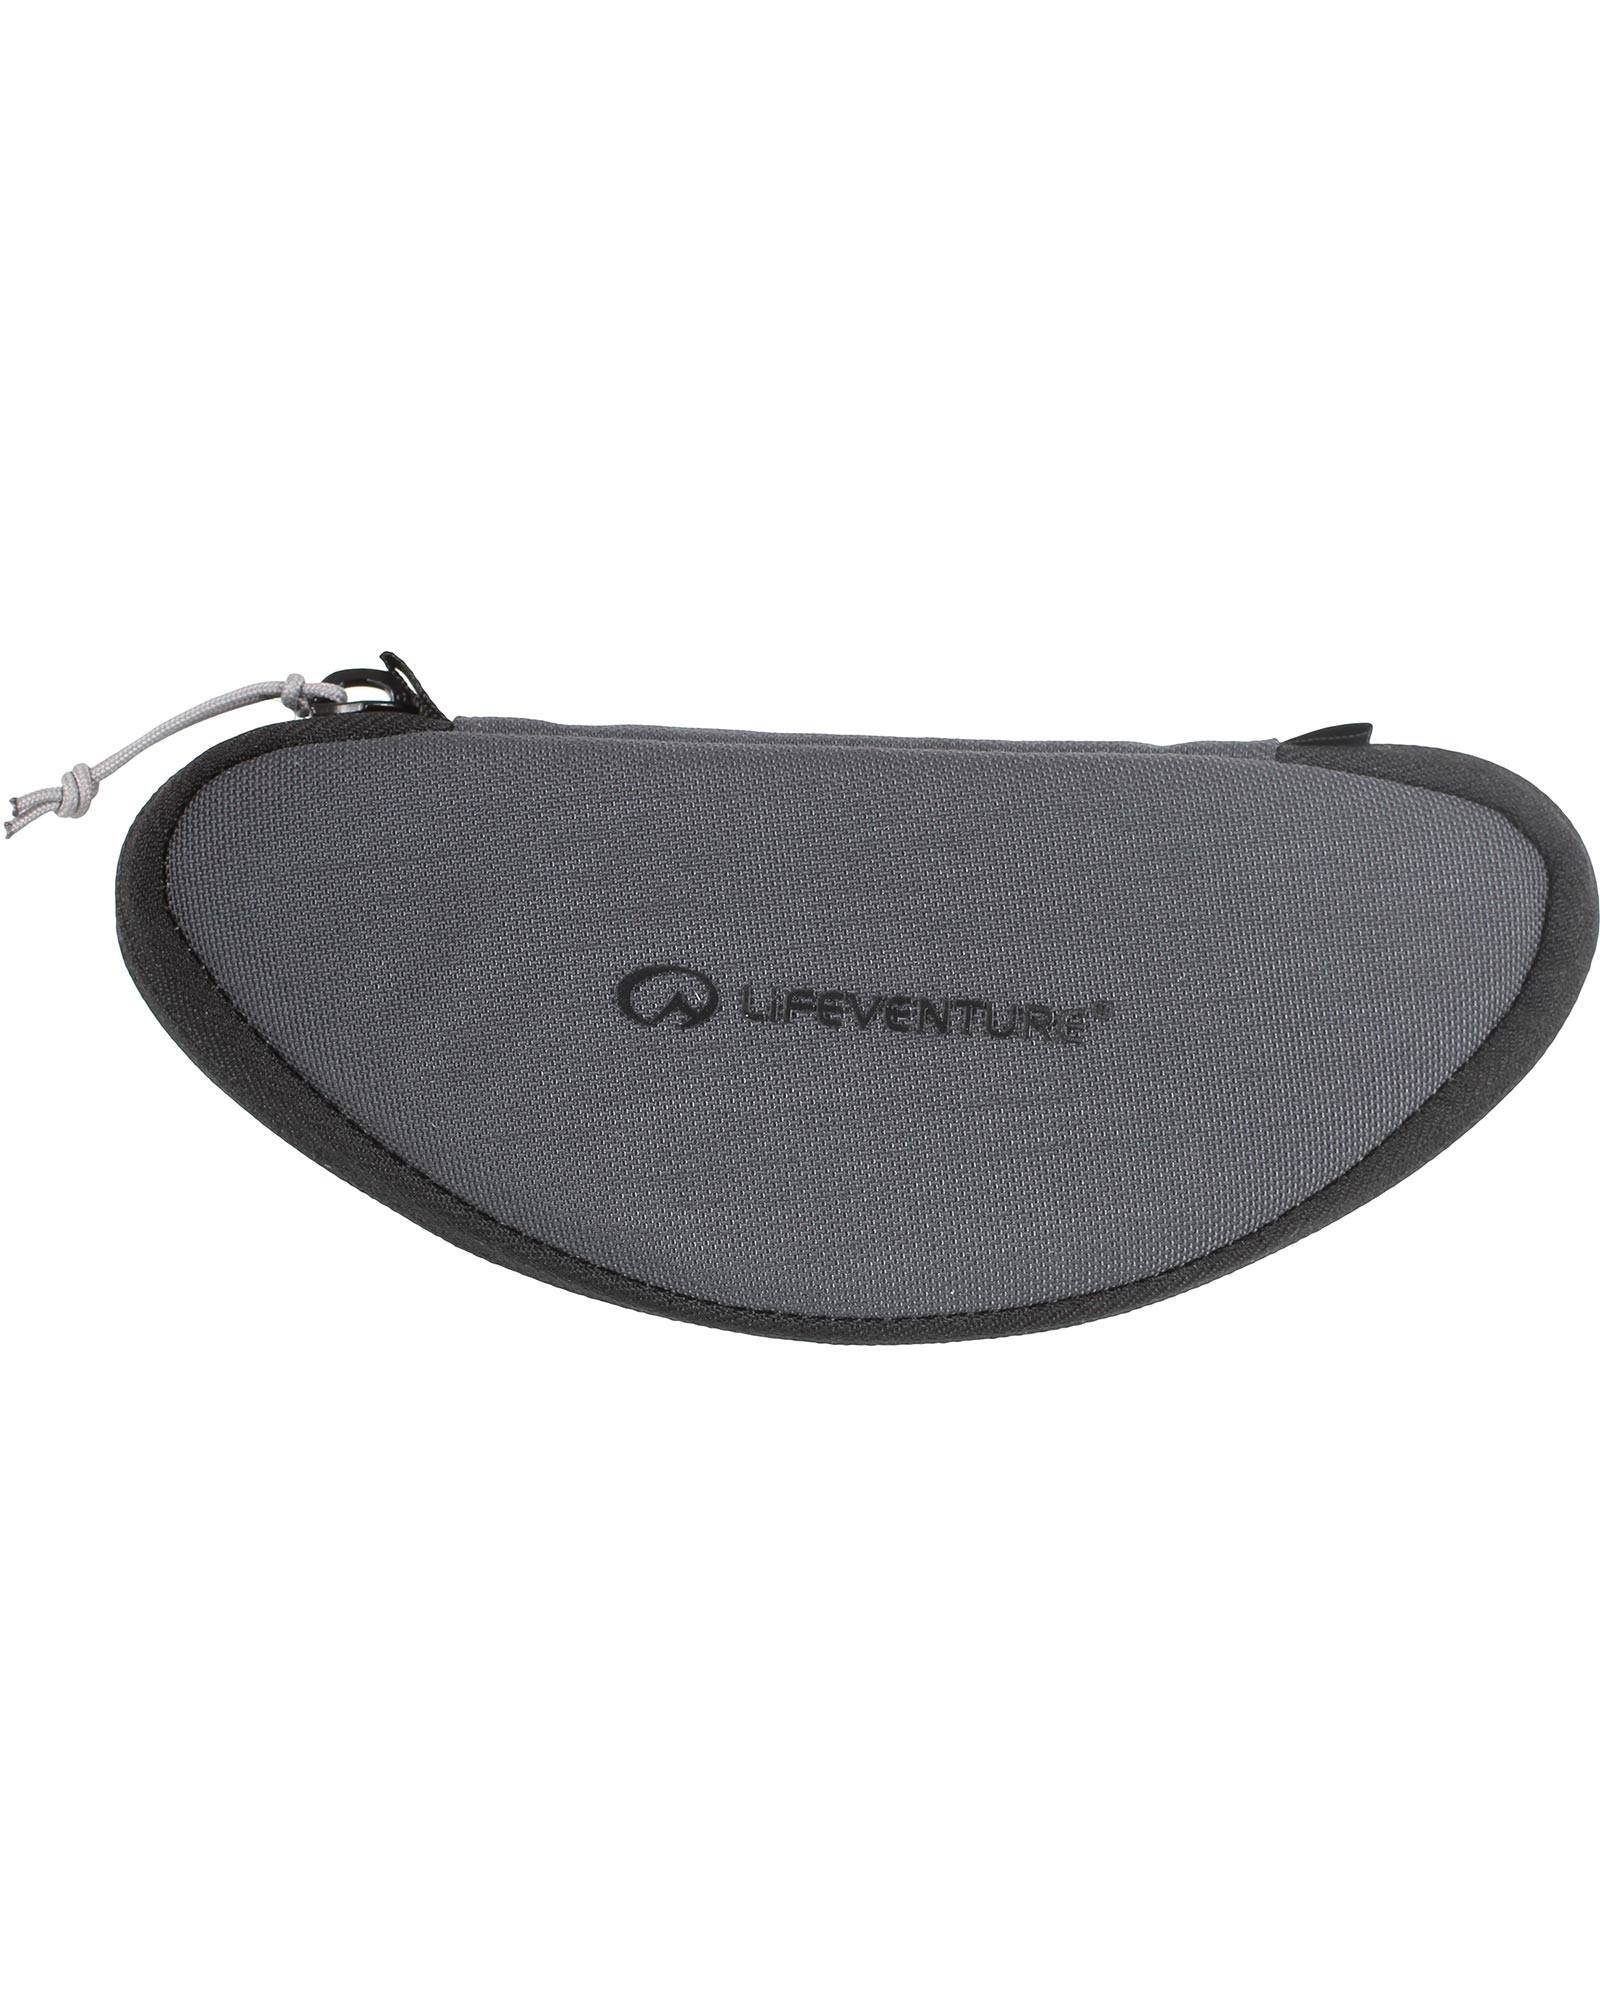 Product image of Lifeventure Recycled Sunglasses Case